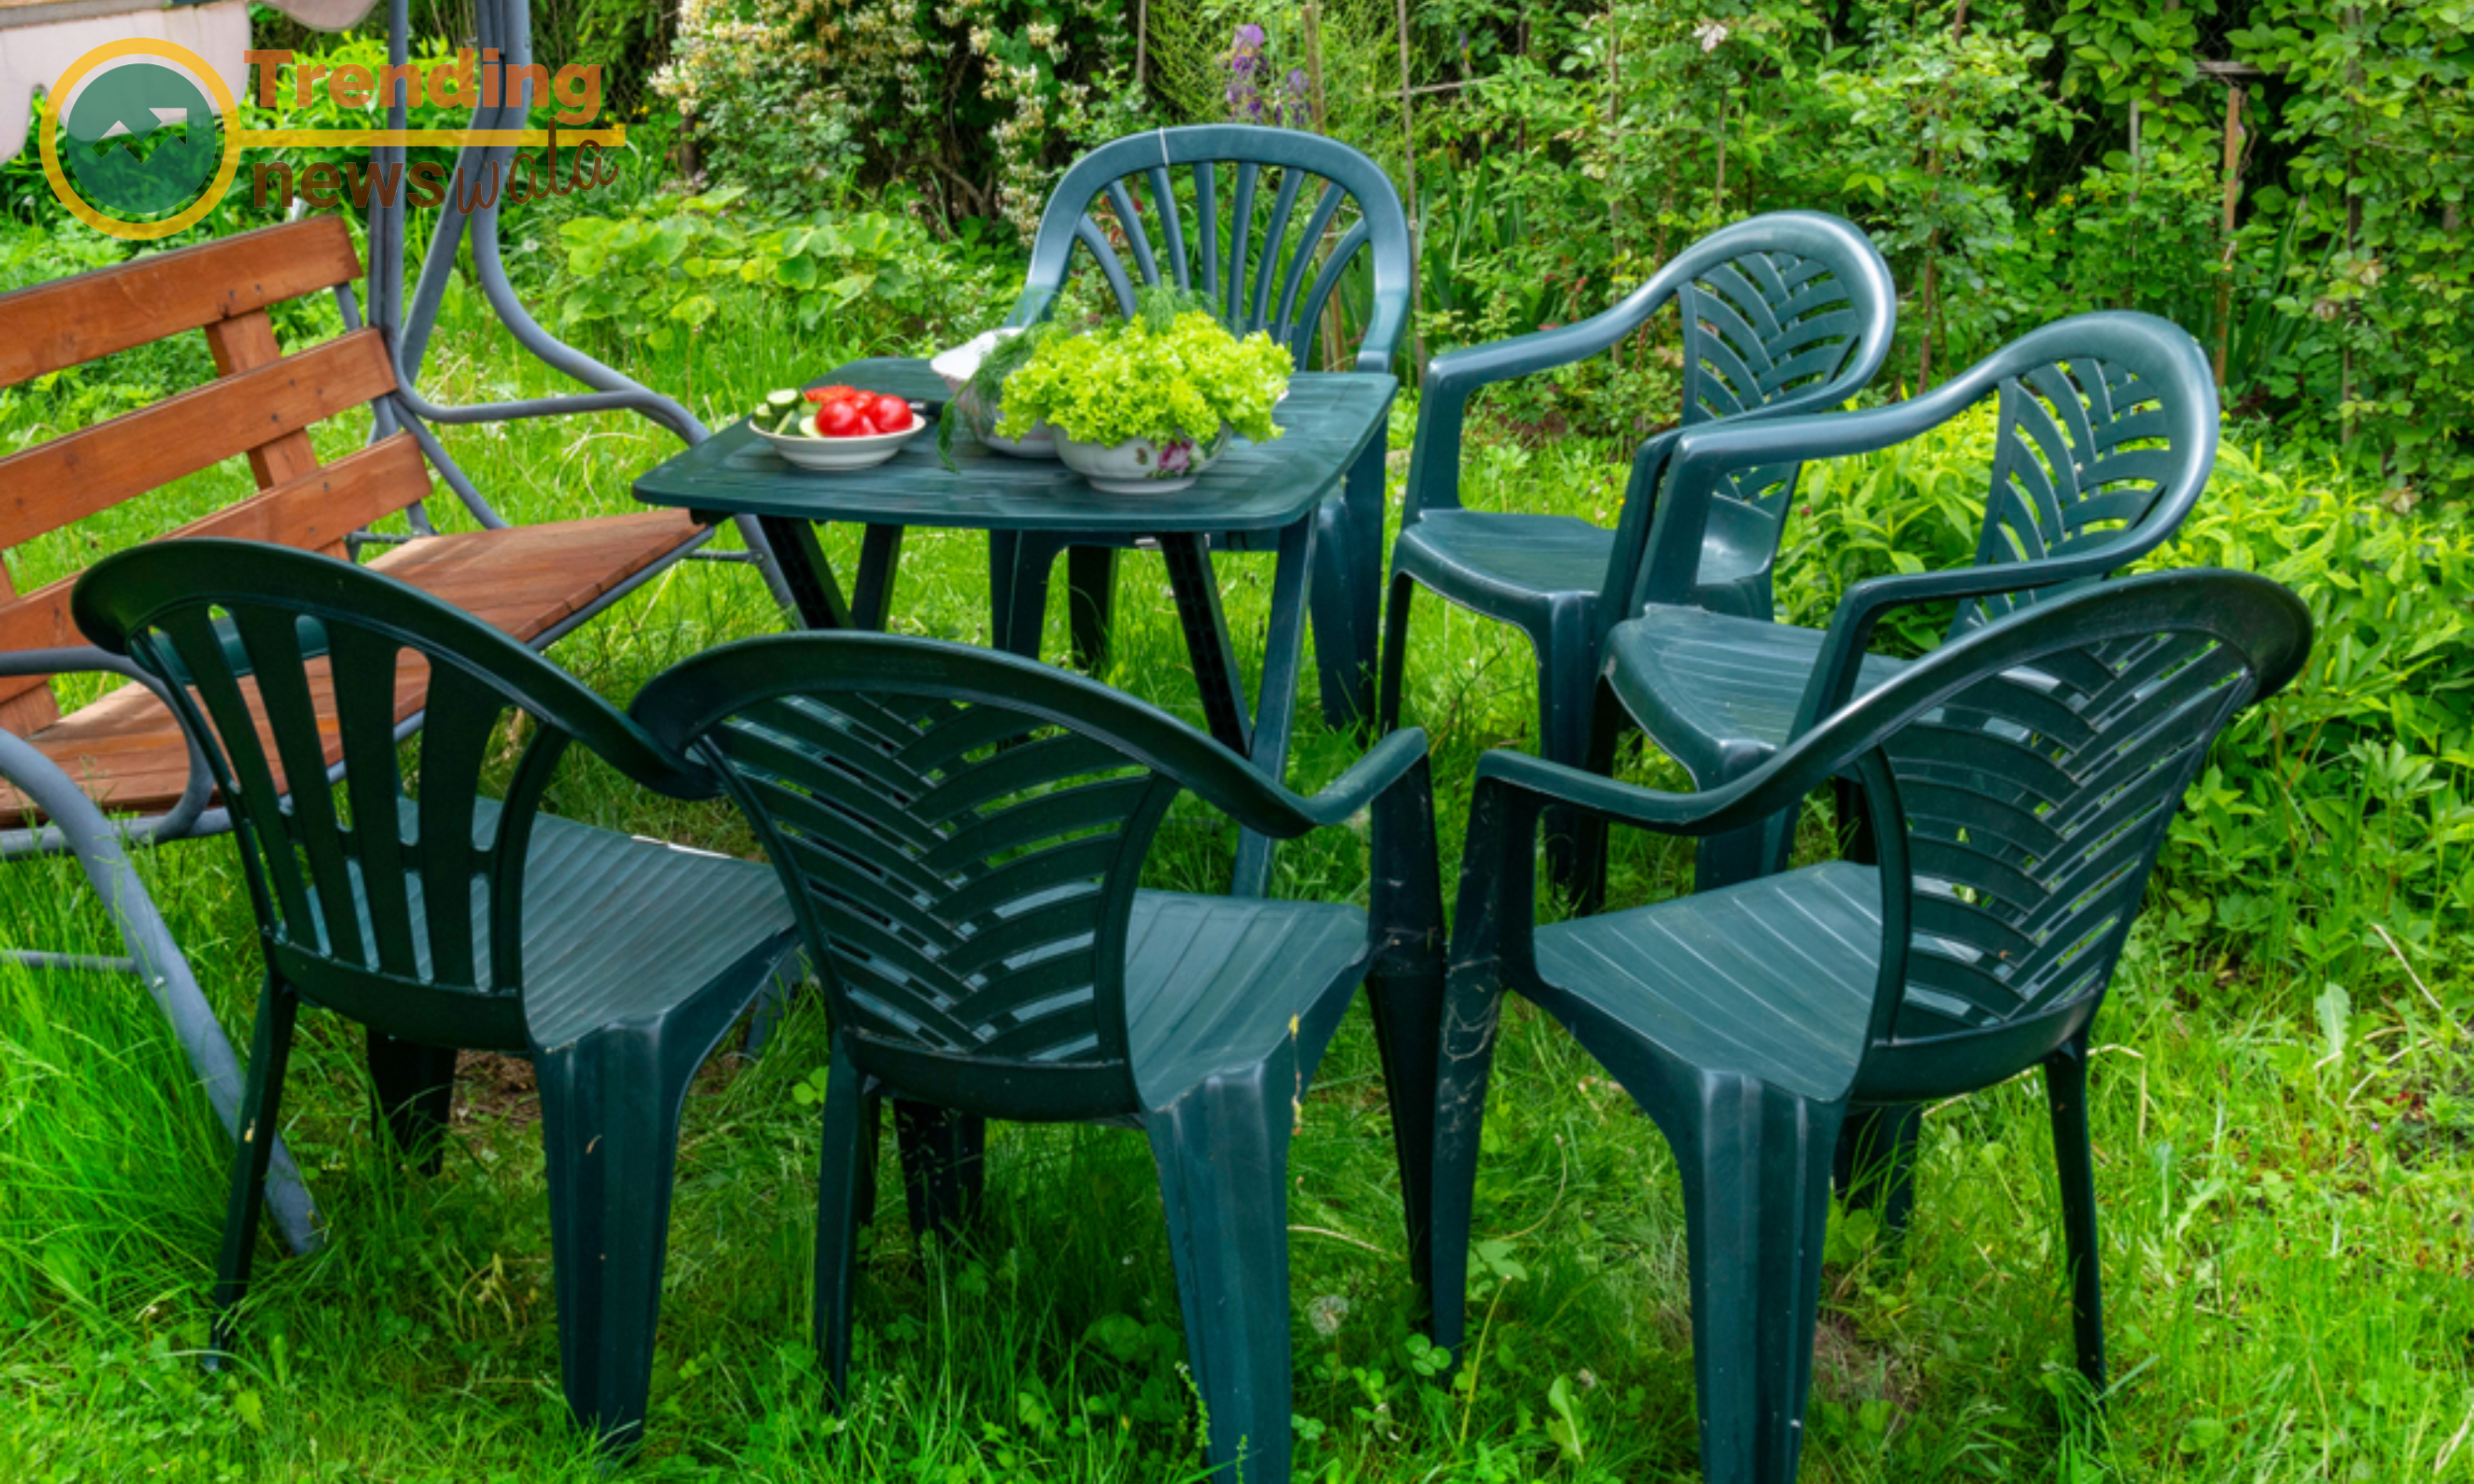 Break away from the ordinary by opting for bold, colored designer plastic chairs